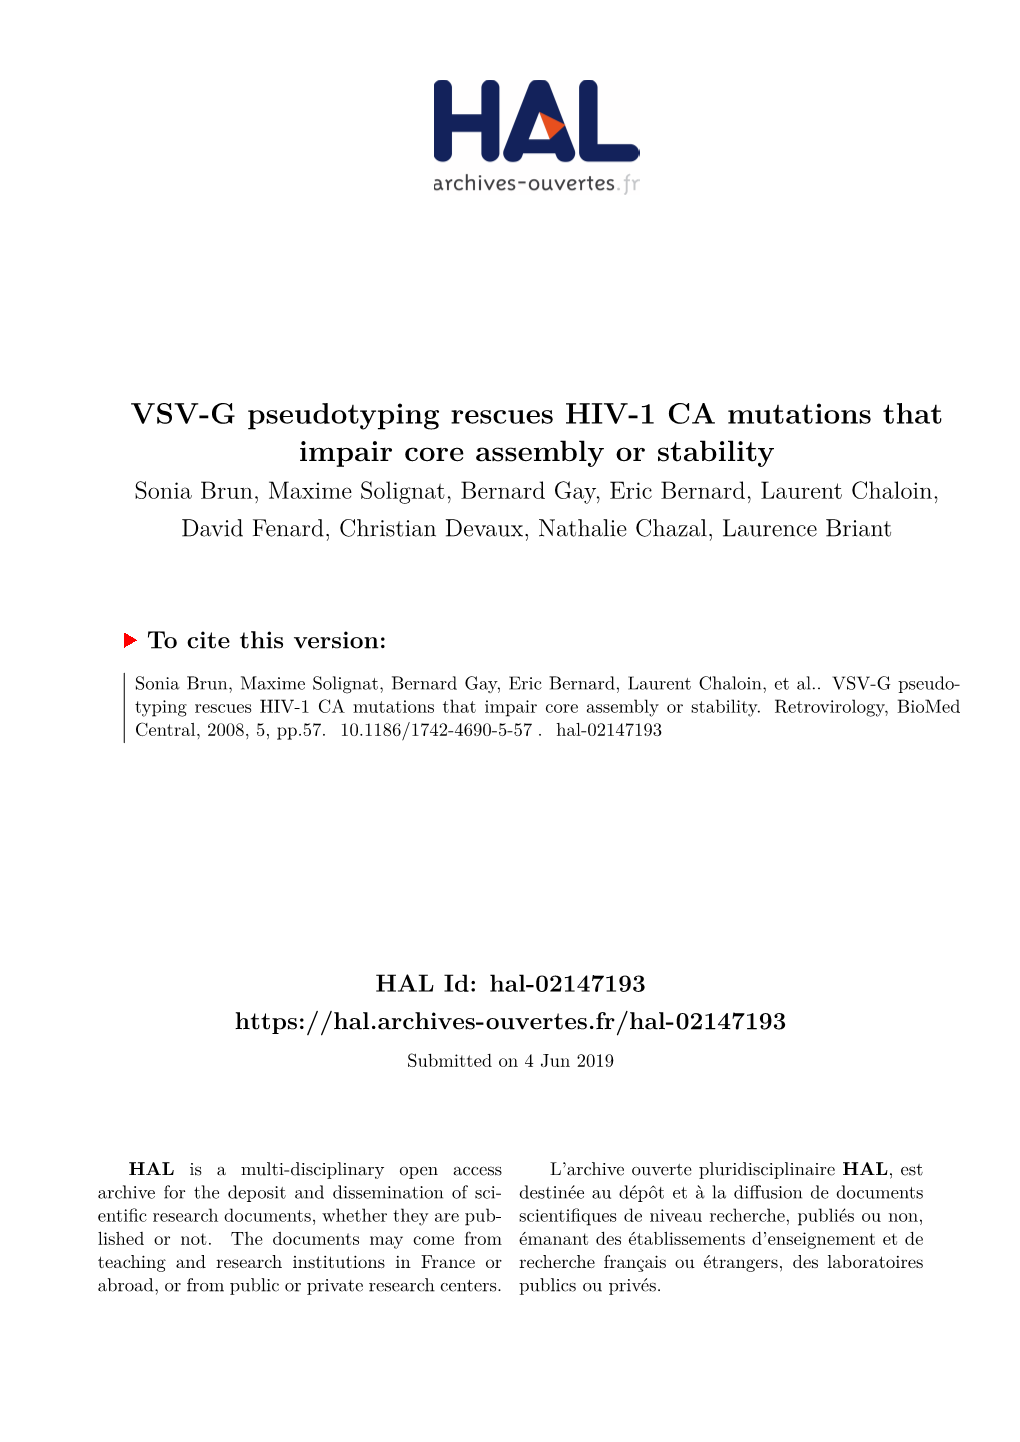 VSV-G Pseudotyping Rescues HIV-1 CA Mutations That Impair Core